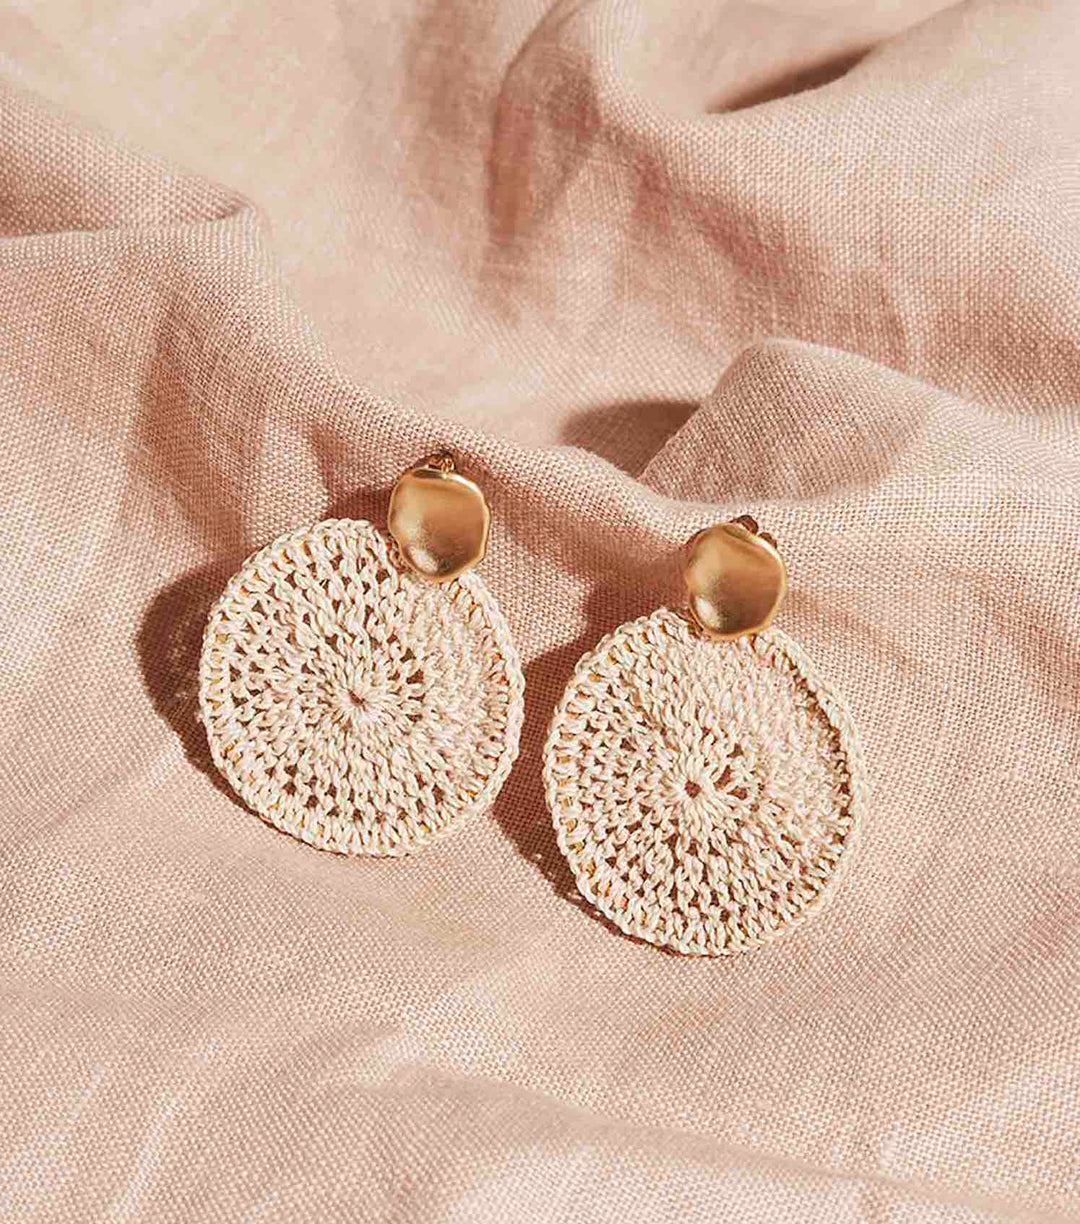 Gold disc earrings with handwoven natural fibre hoops on a white background.